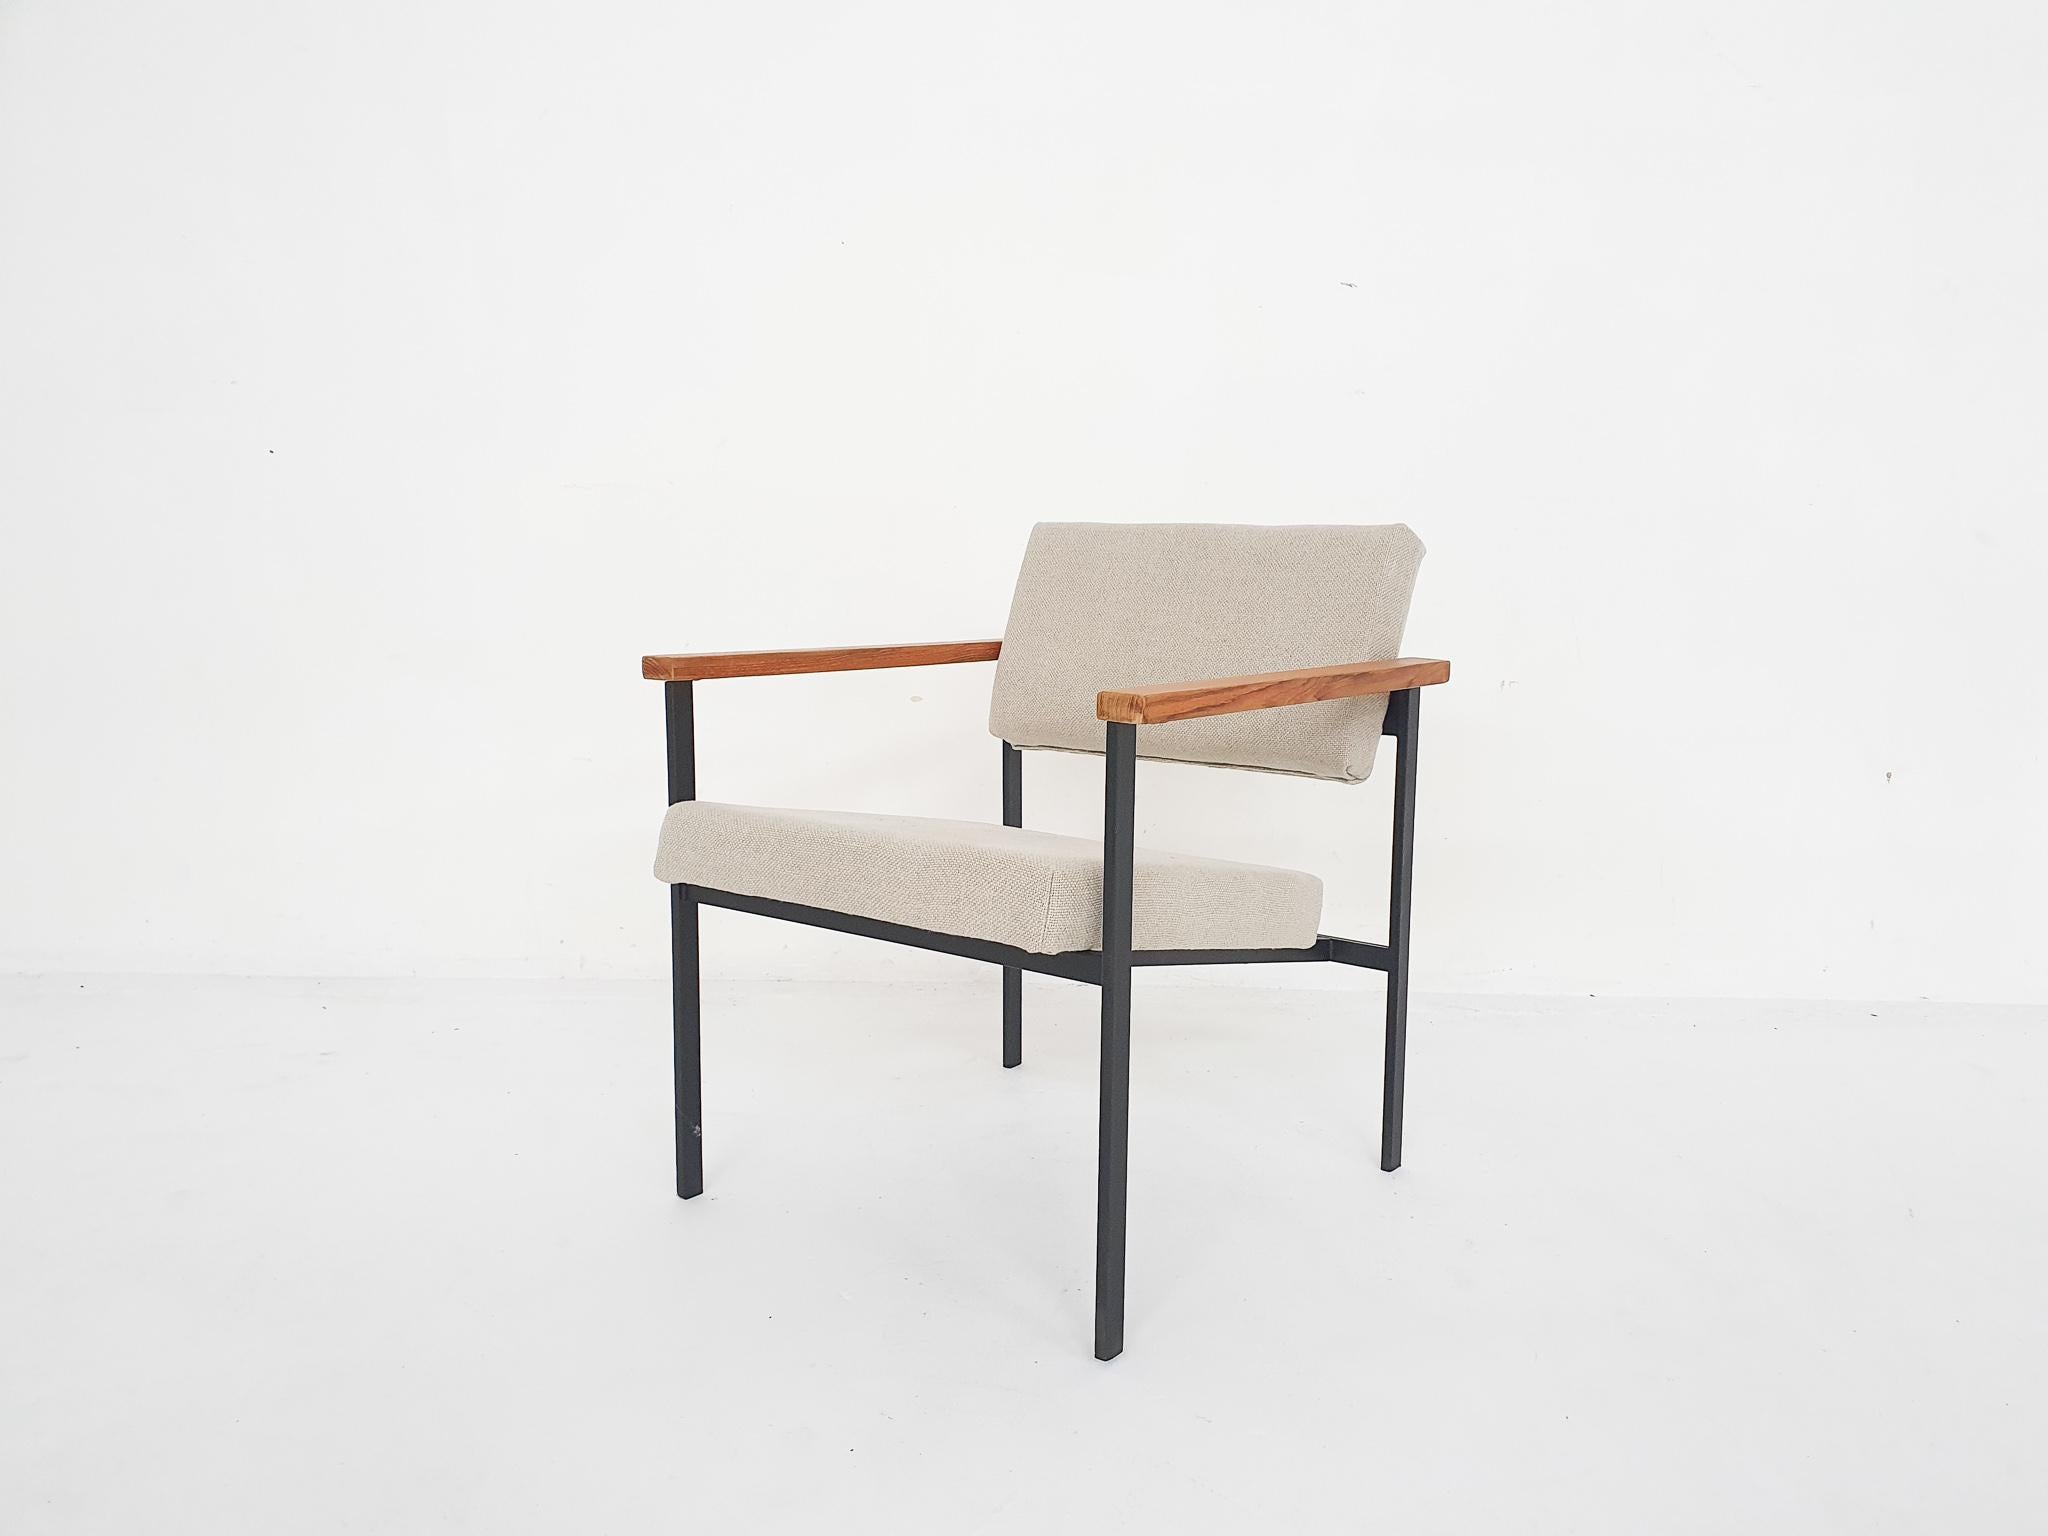 Minimalistic lounge chair by the Dutch manufacturer 